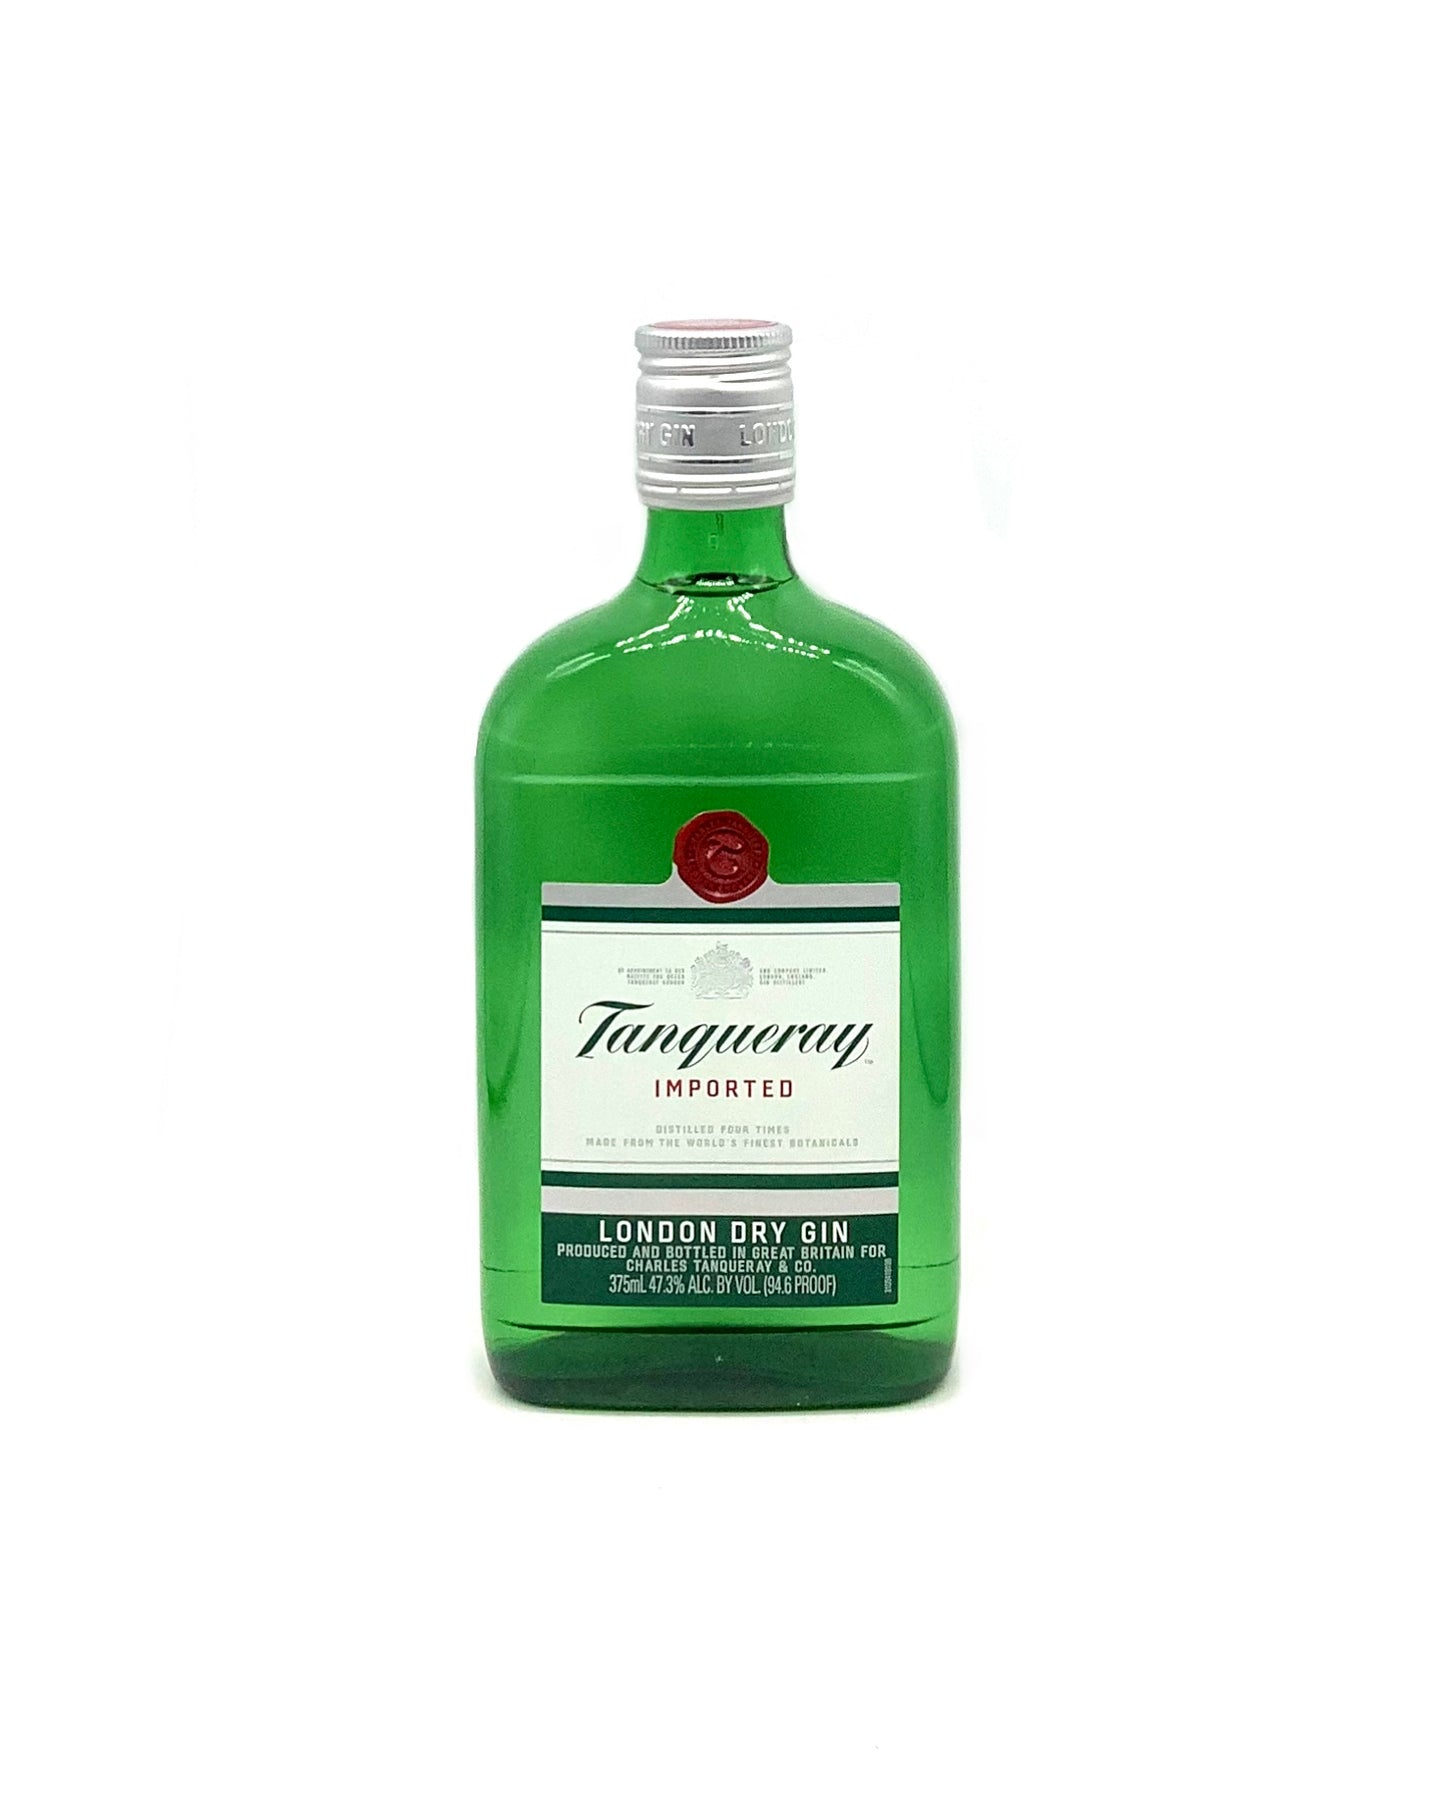 Tanqueray London Dry Gin 1.75 - BottleBuys